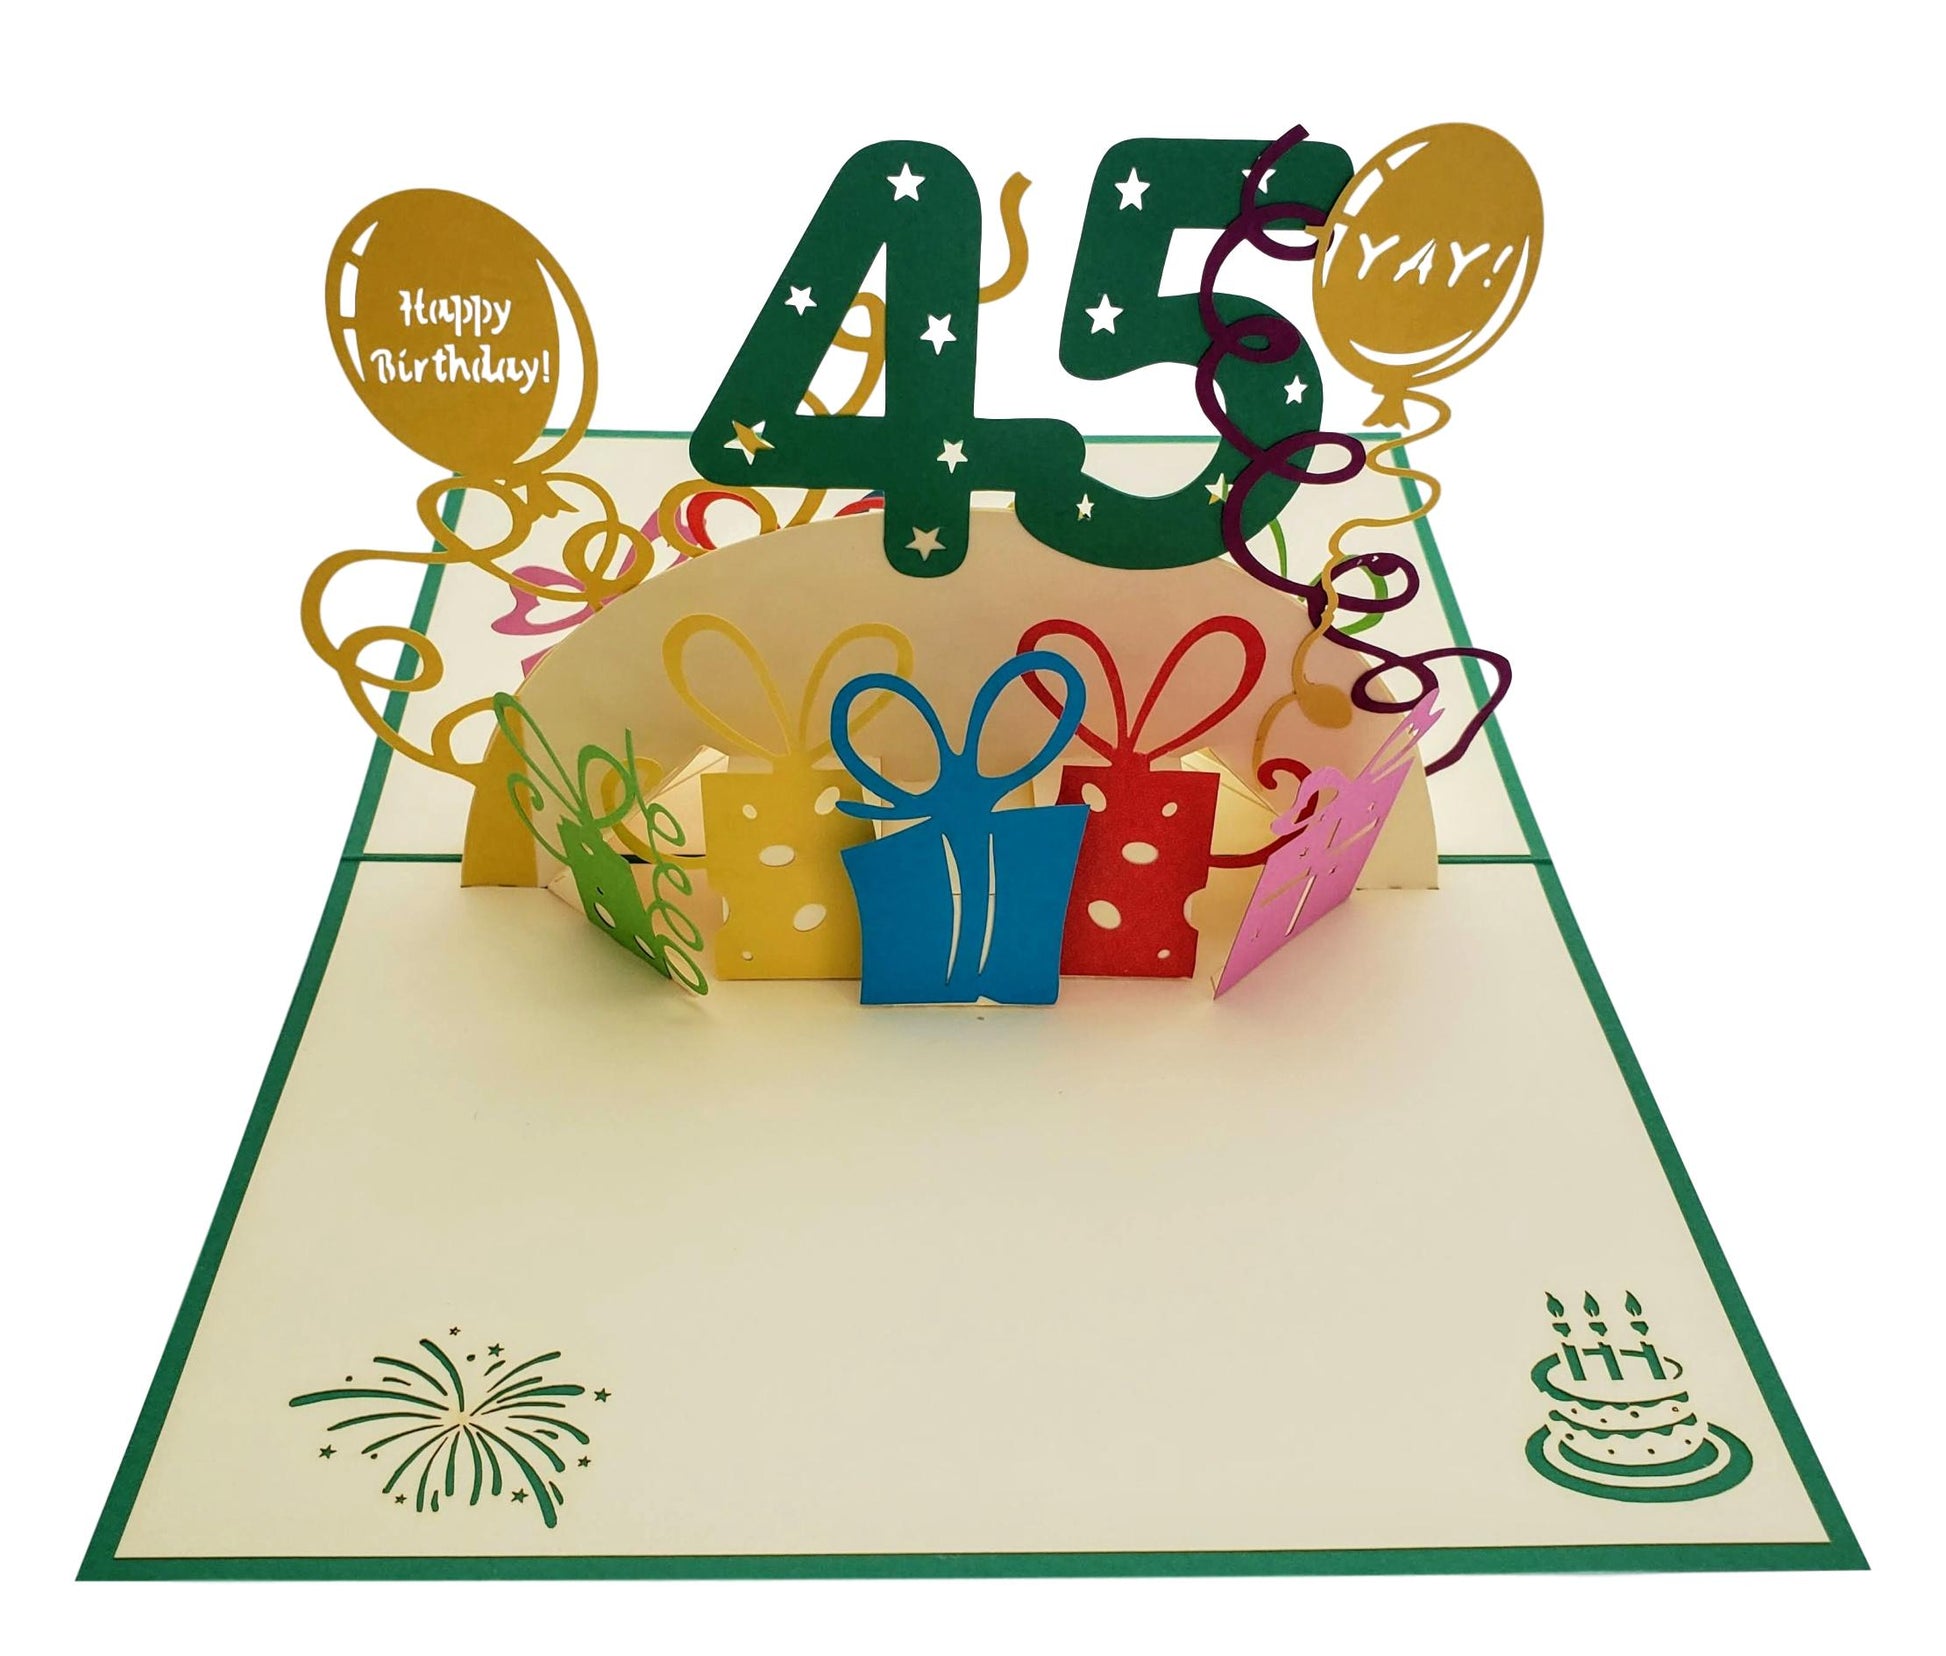 Happy 45th Birthday With Lots of Presents 3D Pop Up Greeting Card - Age - Birthday - iGifts And Cards